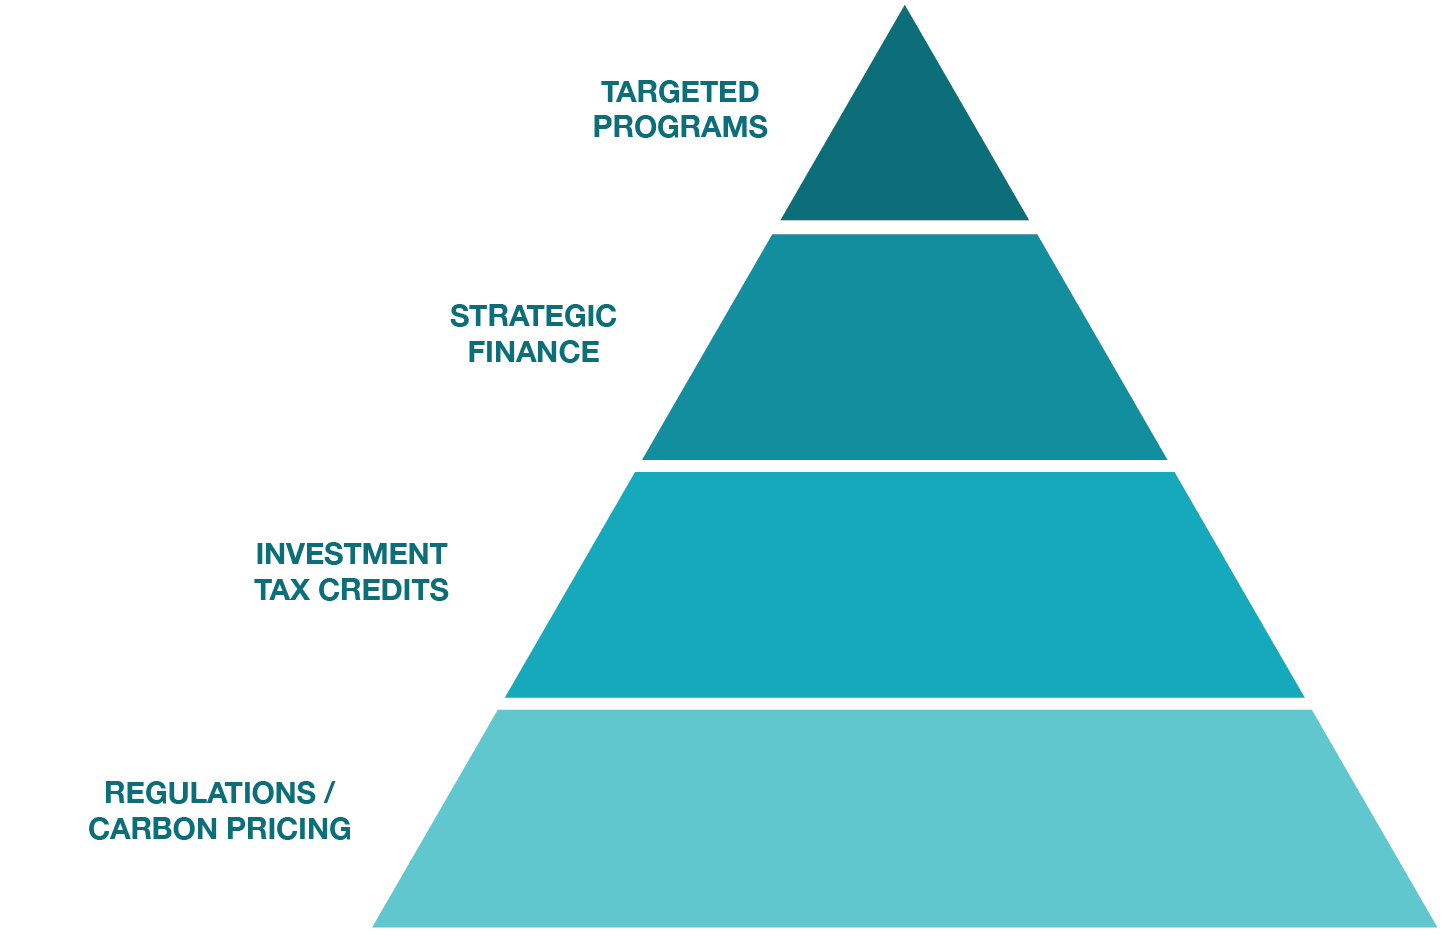 Pyramid showing the focus of the plan for clean economy. From the bottom to the top: Regulations/Carbon pricing, Investment tax credits, Strategic Finance and Targeted programs.